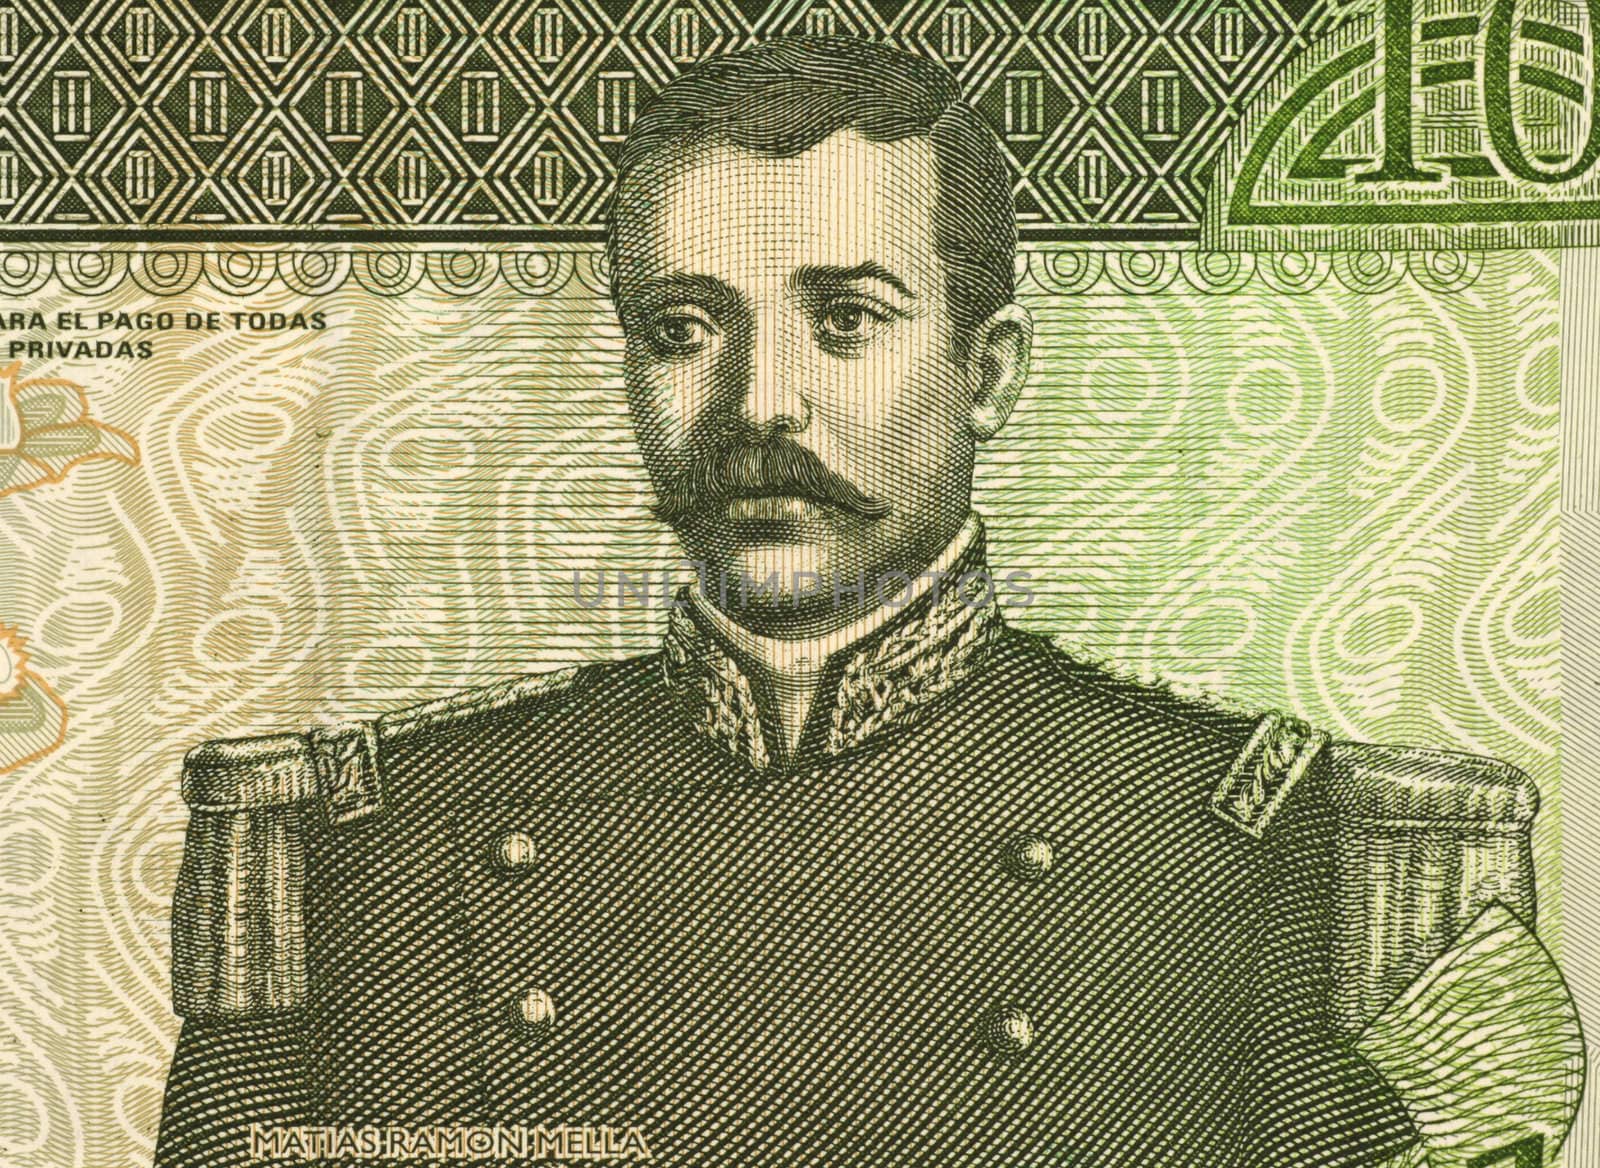 Matias Ramon Mella (1816-1864) on 10 Pesos Oro 2002 Banknote from the Dominican Republic. National hero of the Dominican Republic.